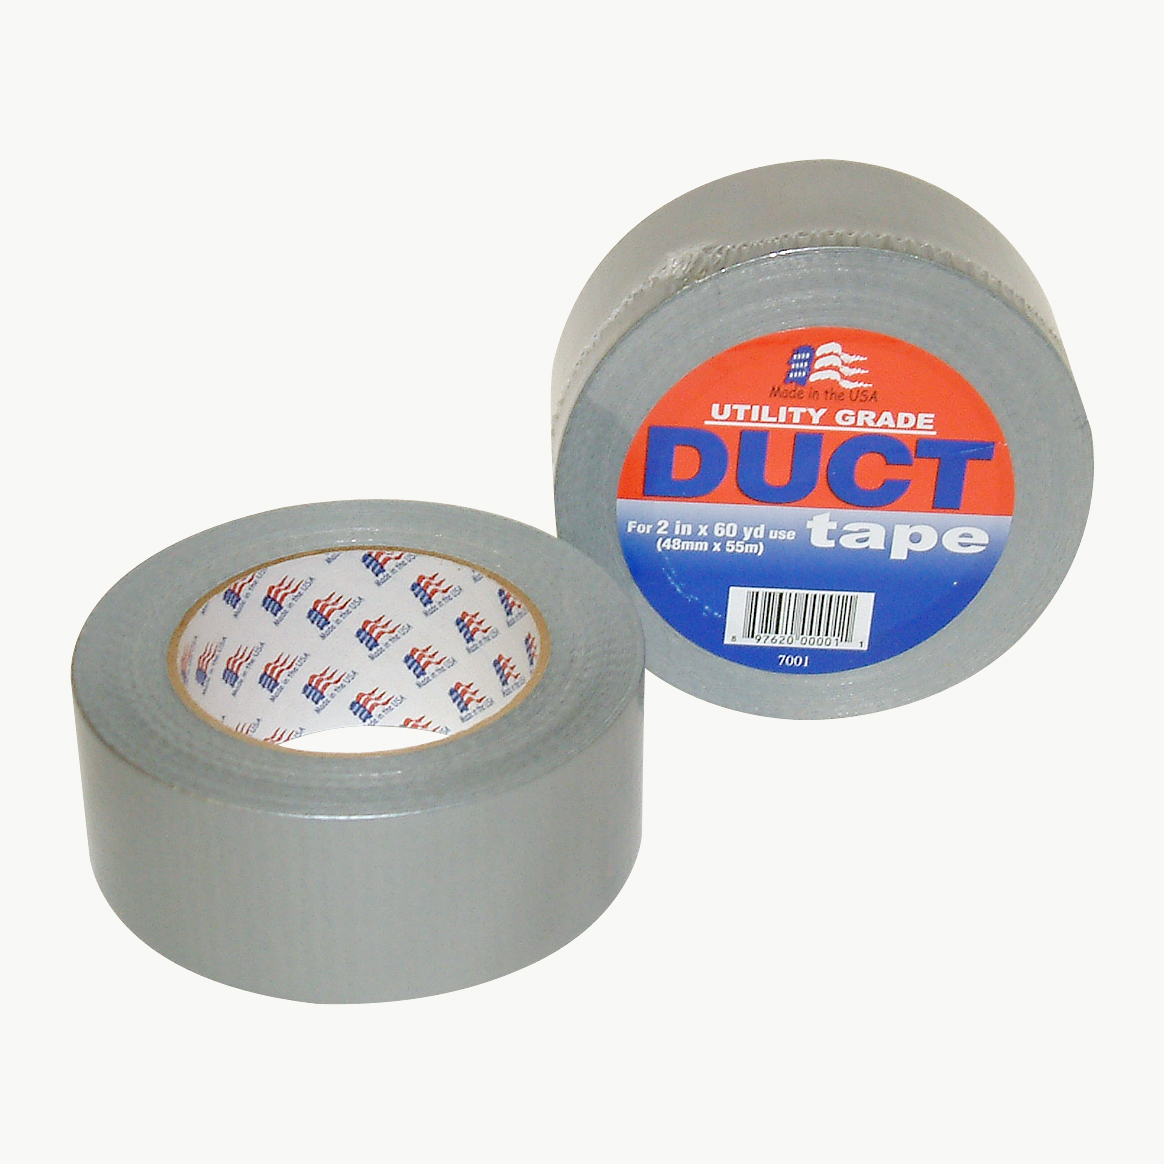 JVCC Utility Grade Duct Tape (PATRIOT-1)